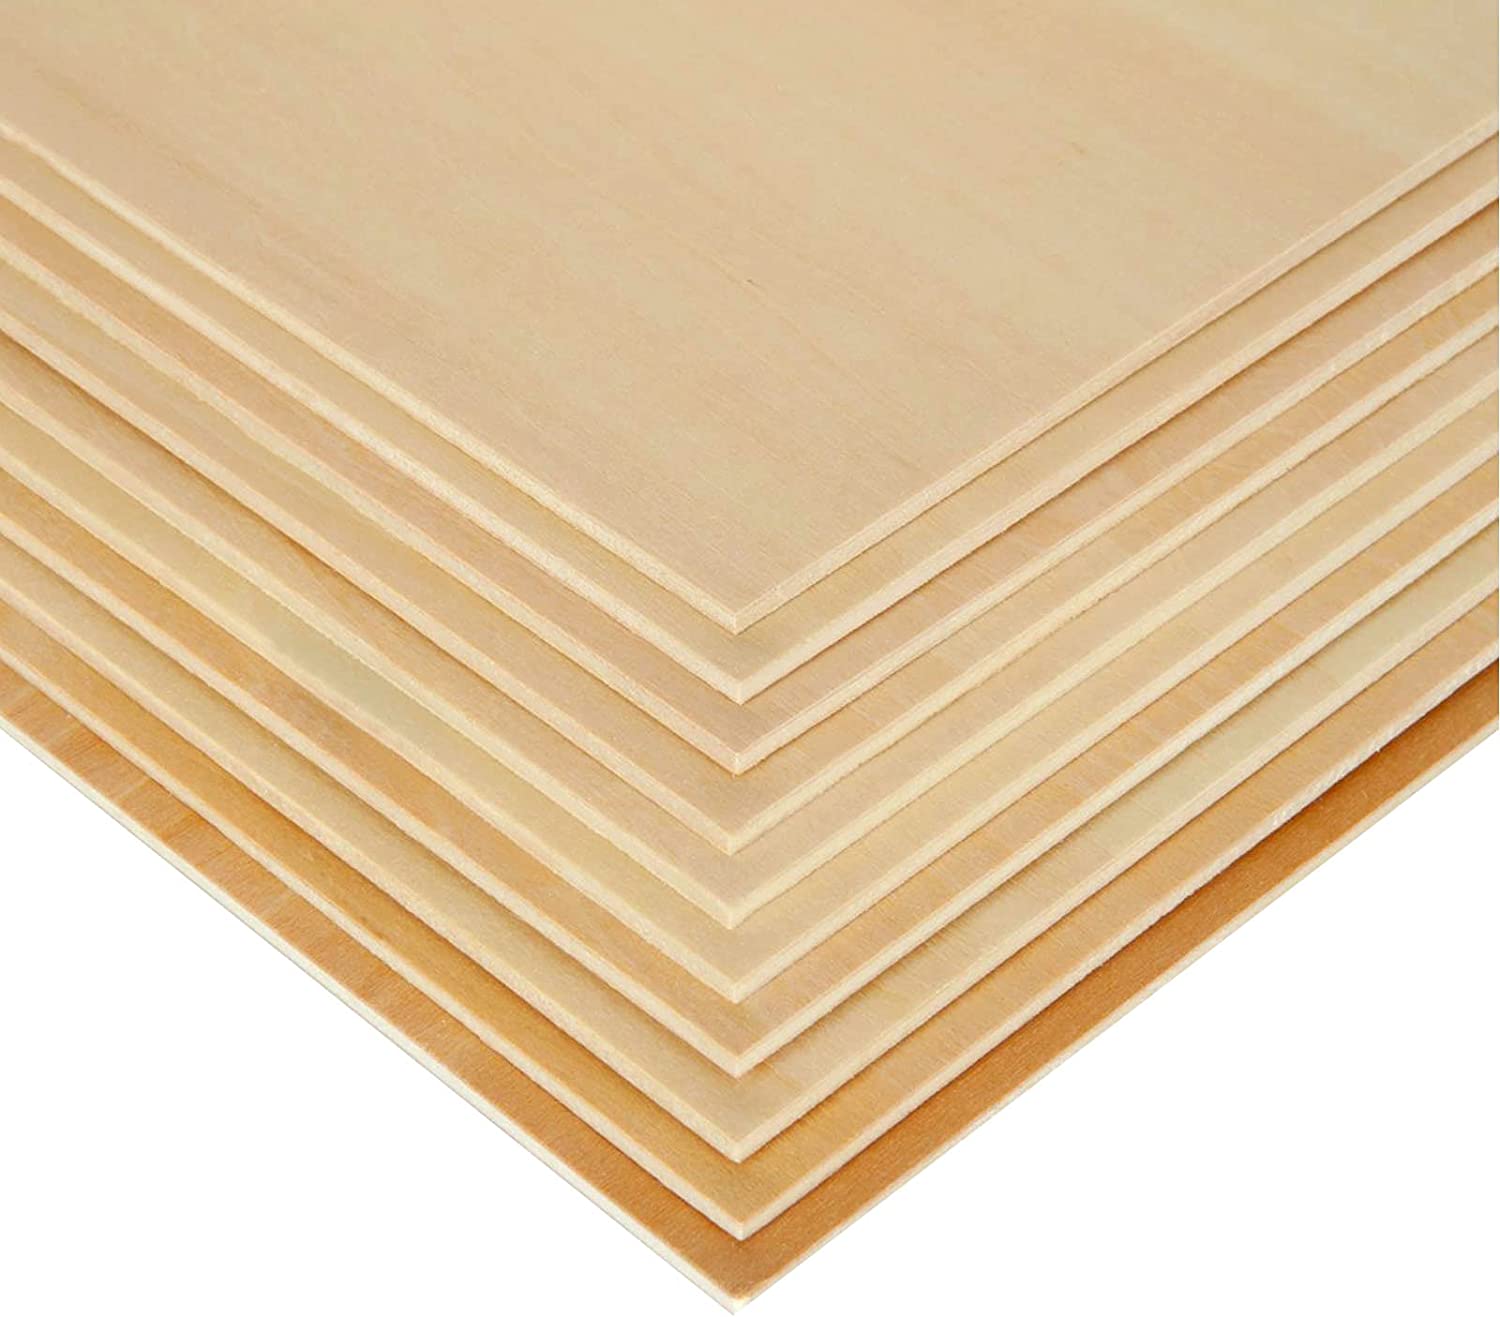 10pcs A3 Plywood Sheets 3mm Thickness (+/- 0.2mm) Basswood Plywood